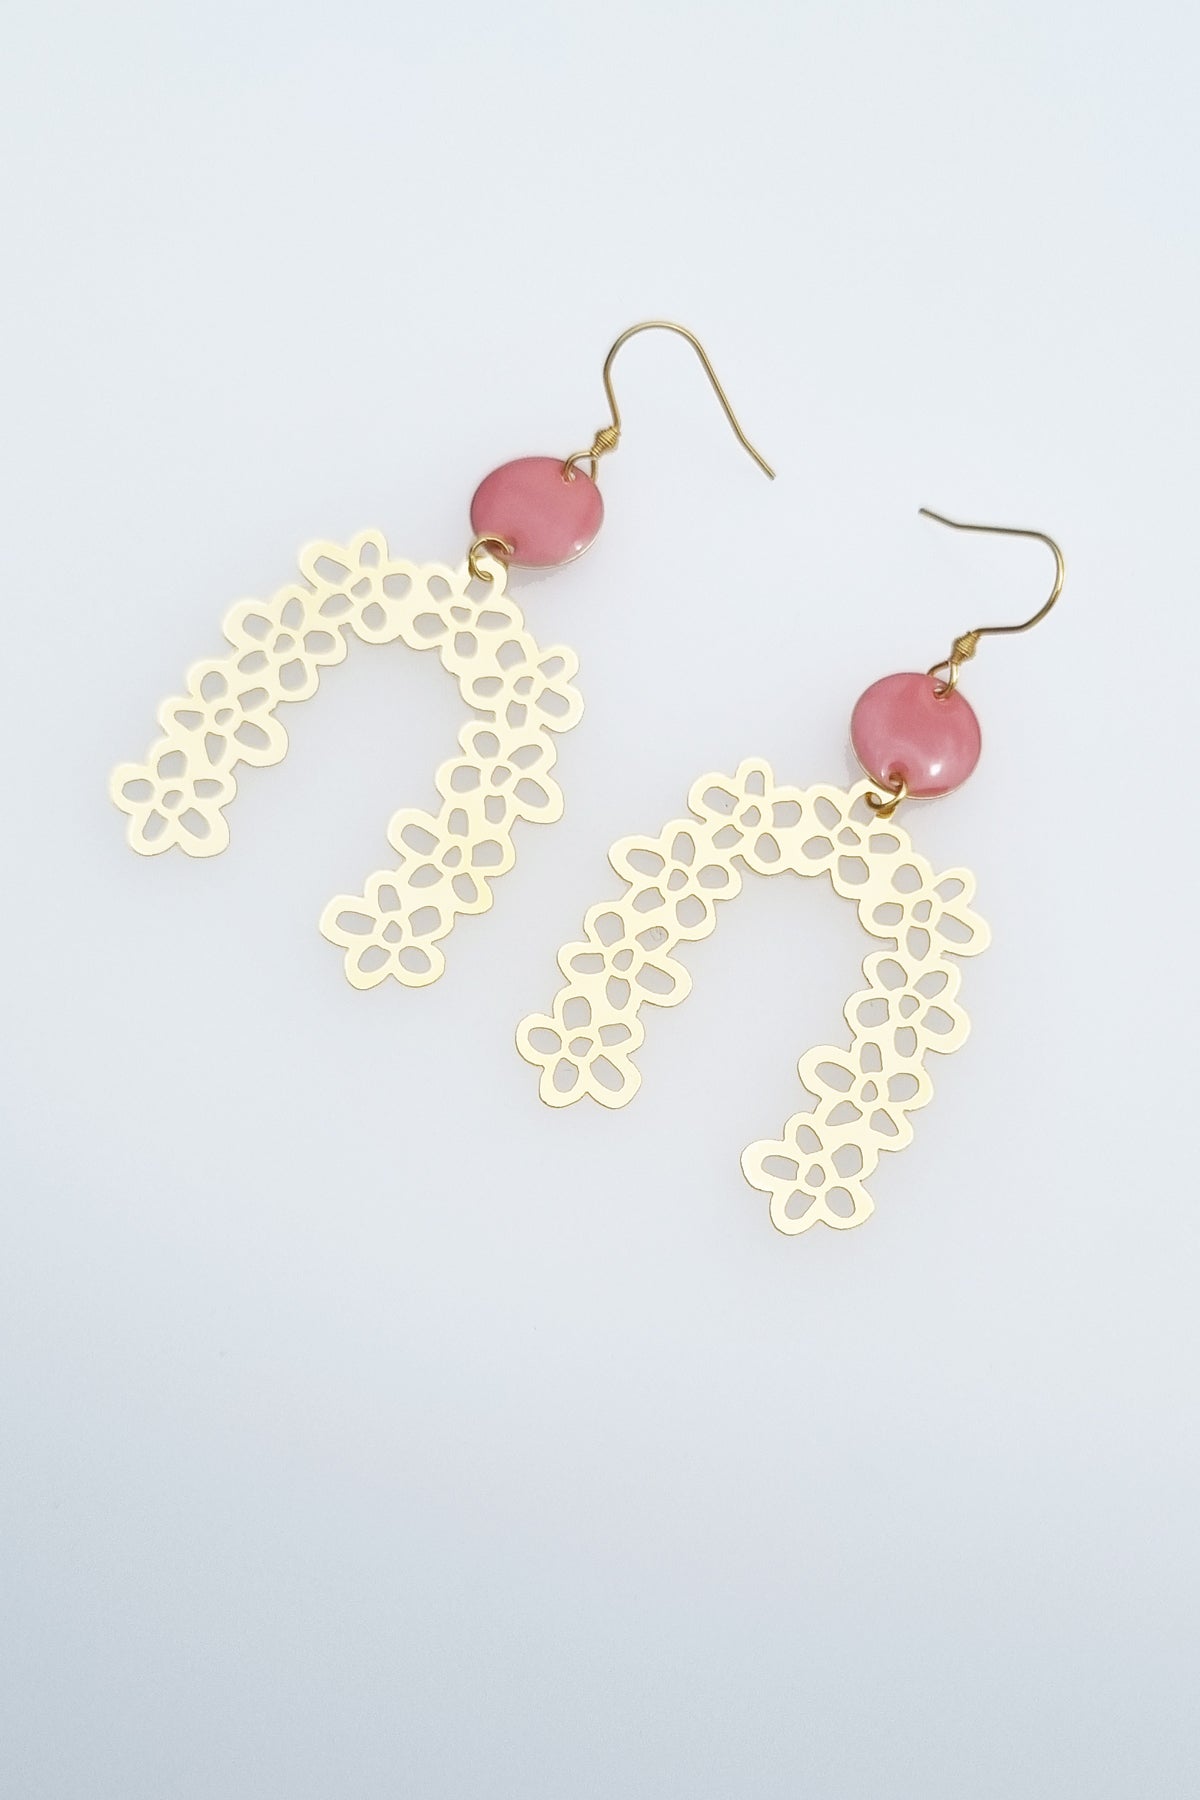 A pair of drop earrings with a hook lay against a white background. They feature a small pink connector dot and a floral arch brass piece.